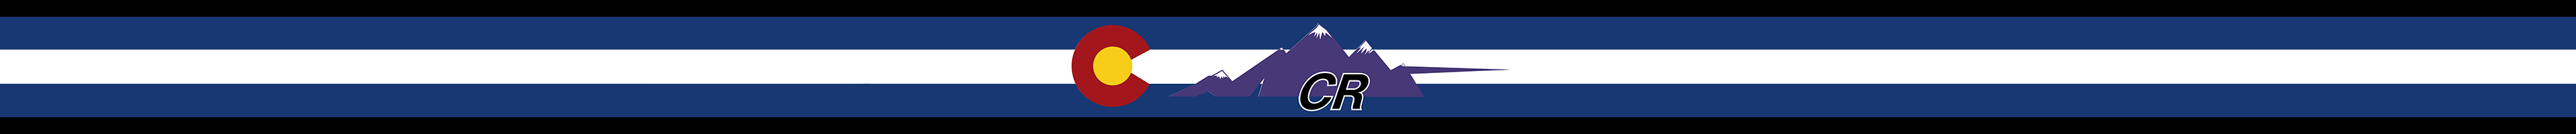 Tail flash graphic with Colorado flag symbol, mountains and the letters CR in front of them